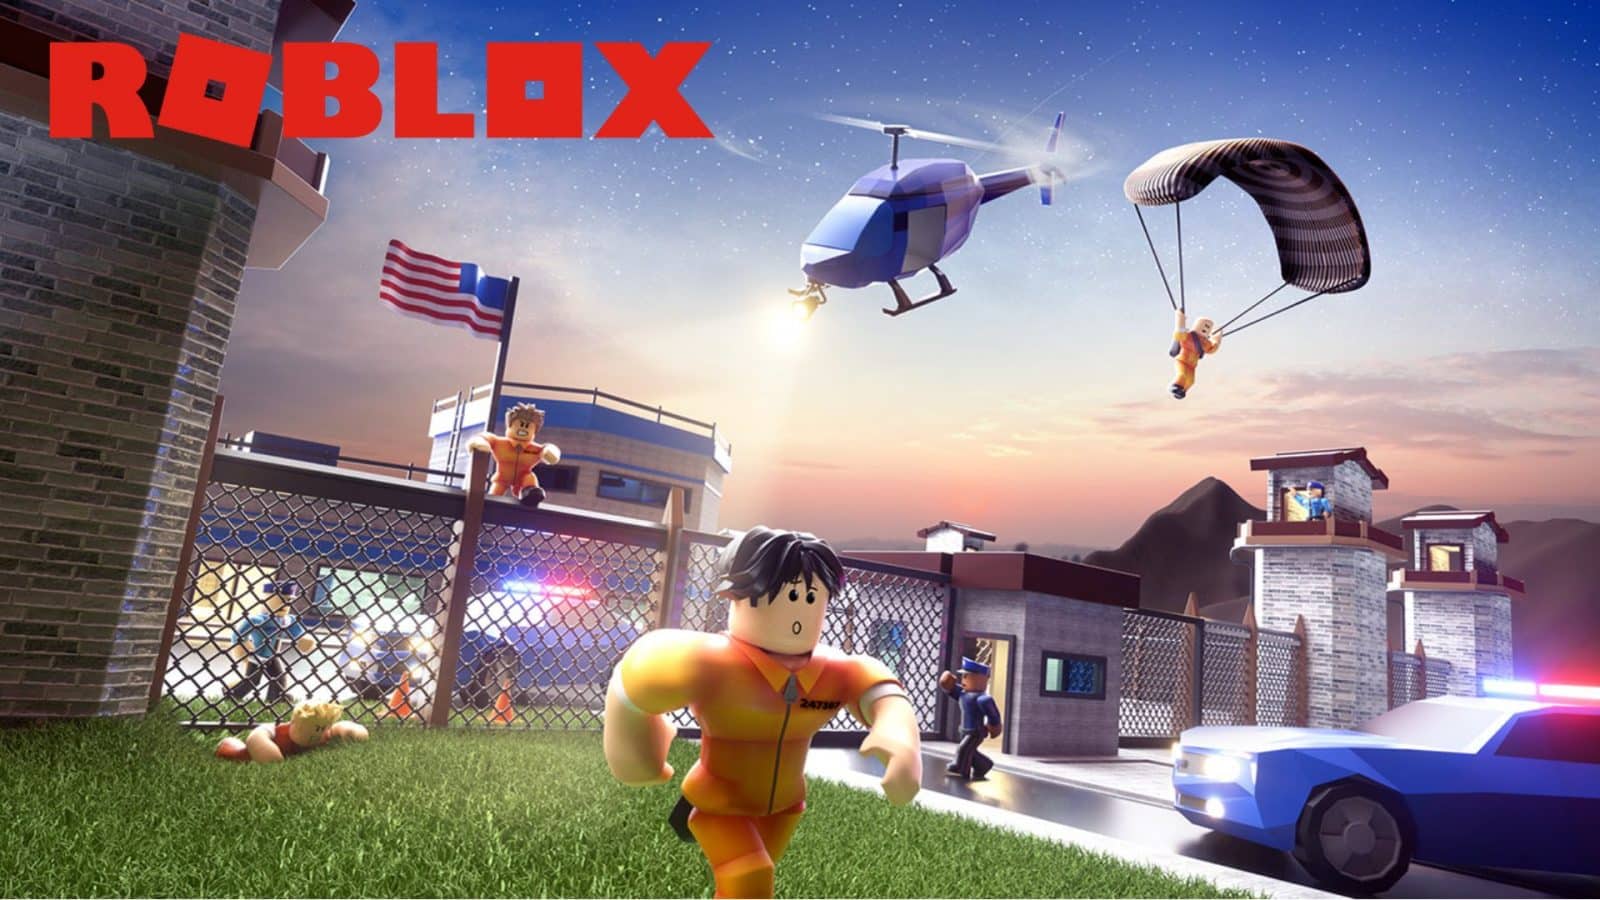 ROBLOX Status on X: ⚠ ROBLOX DOWN ⚠ A majority of the ROBLOX playerbase is  now reporting outages throughout the roblox site. Roblox's official status  reports the Website, Mobile App, Xbox App